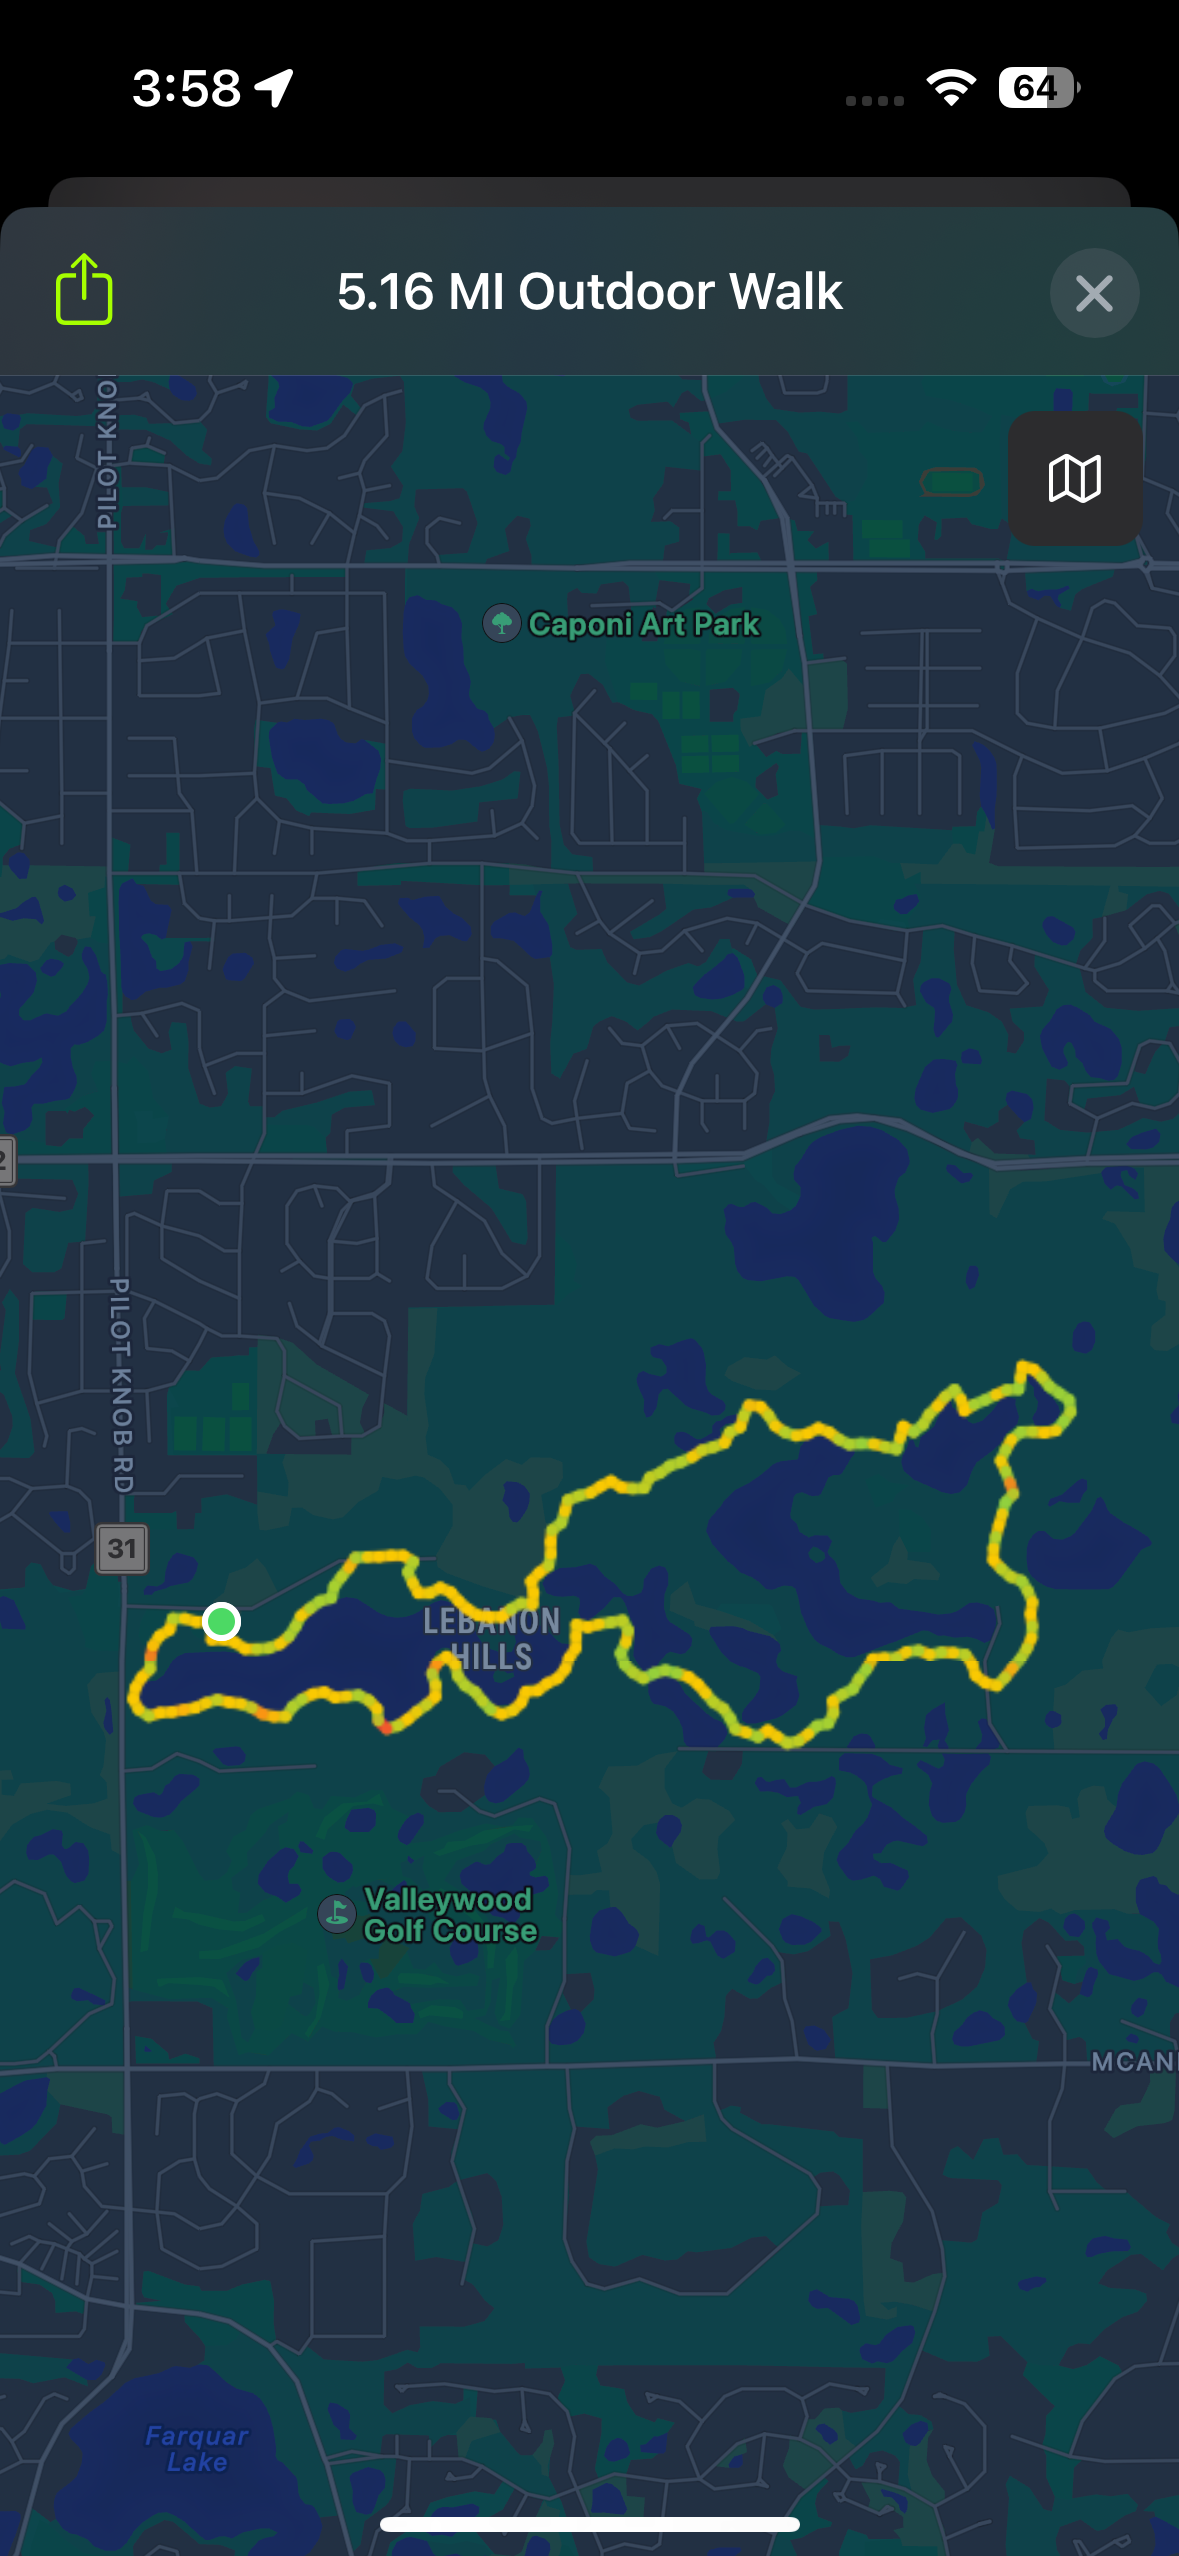 5 mile hike route at Lebanon Hills in Eagan, MN